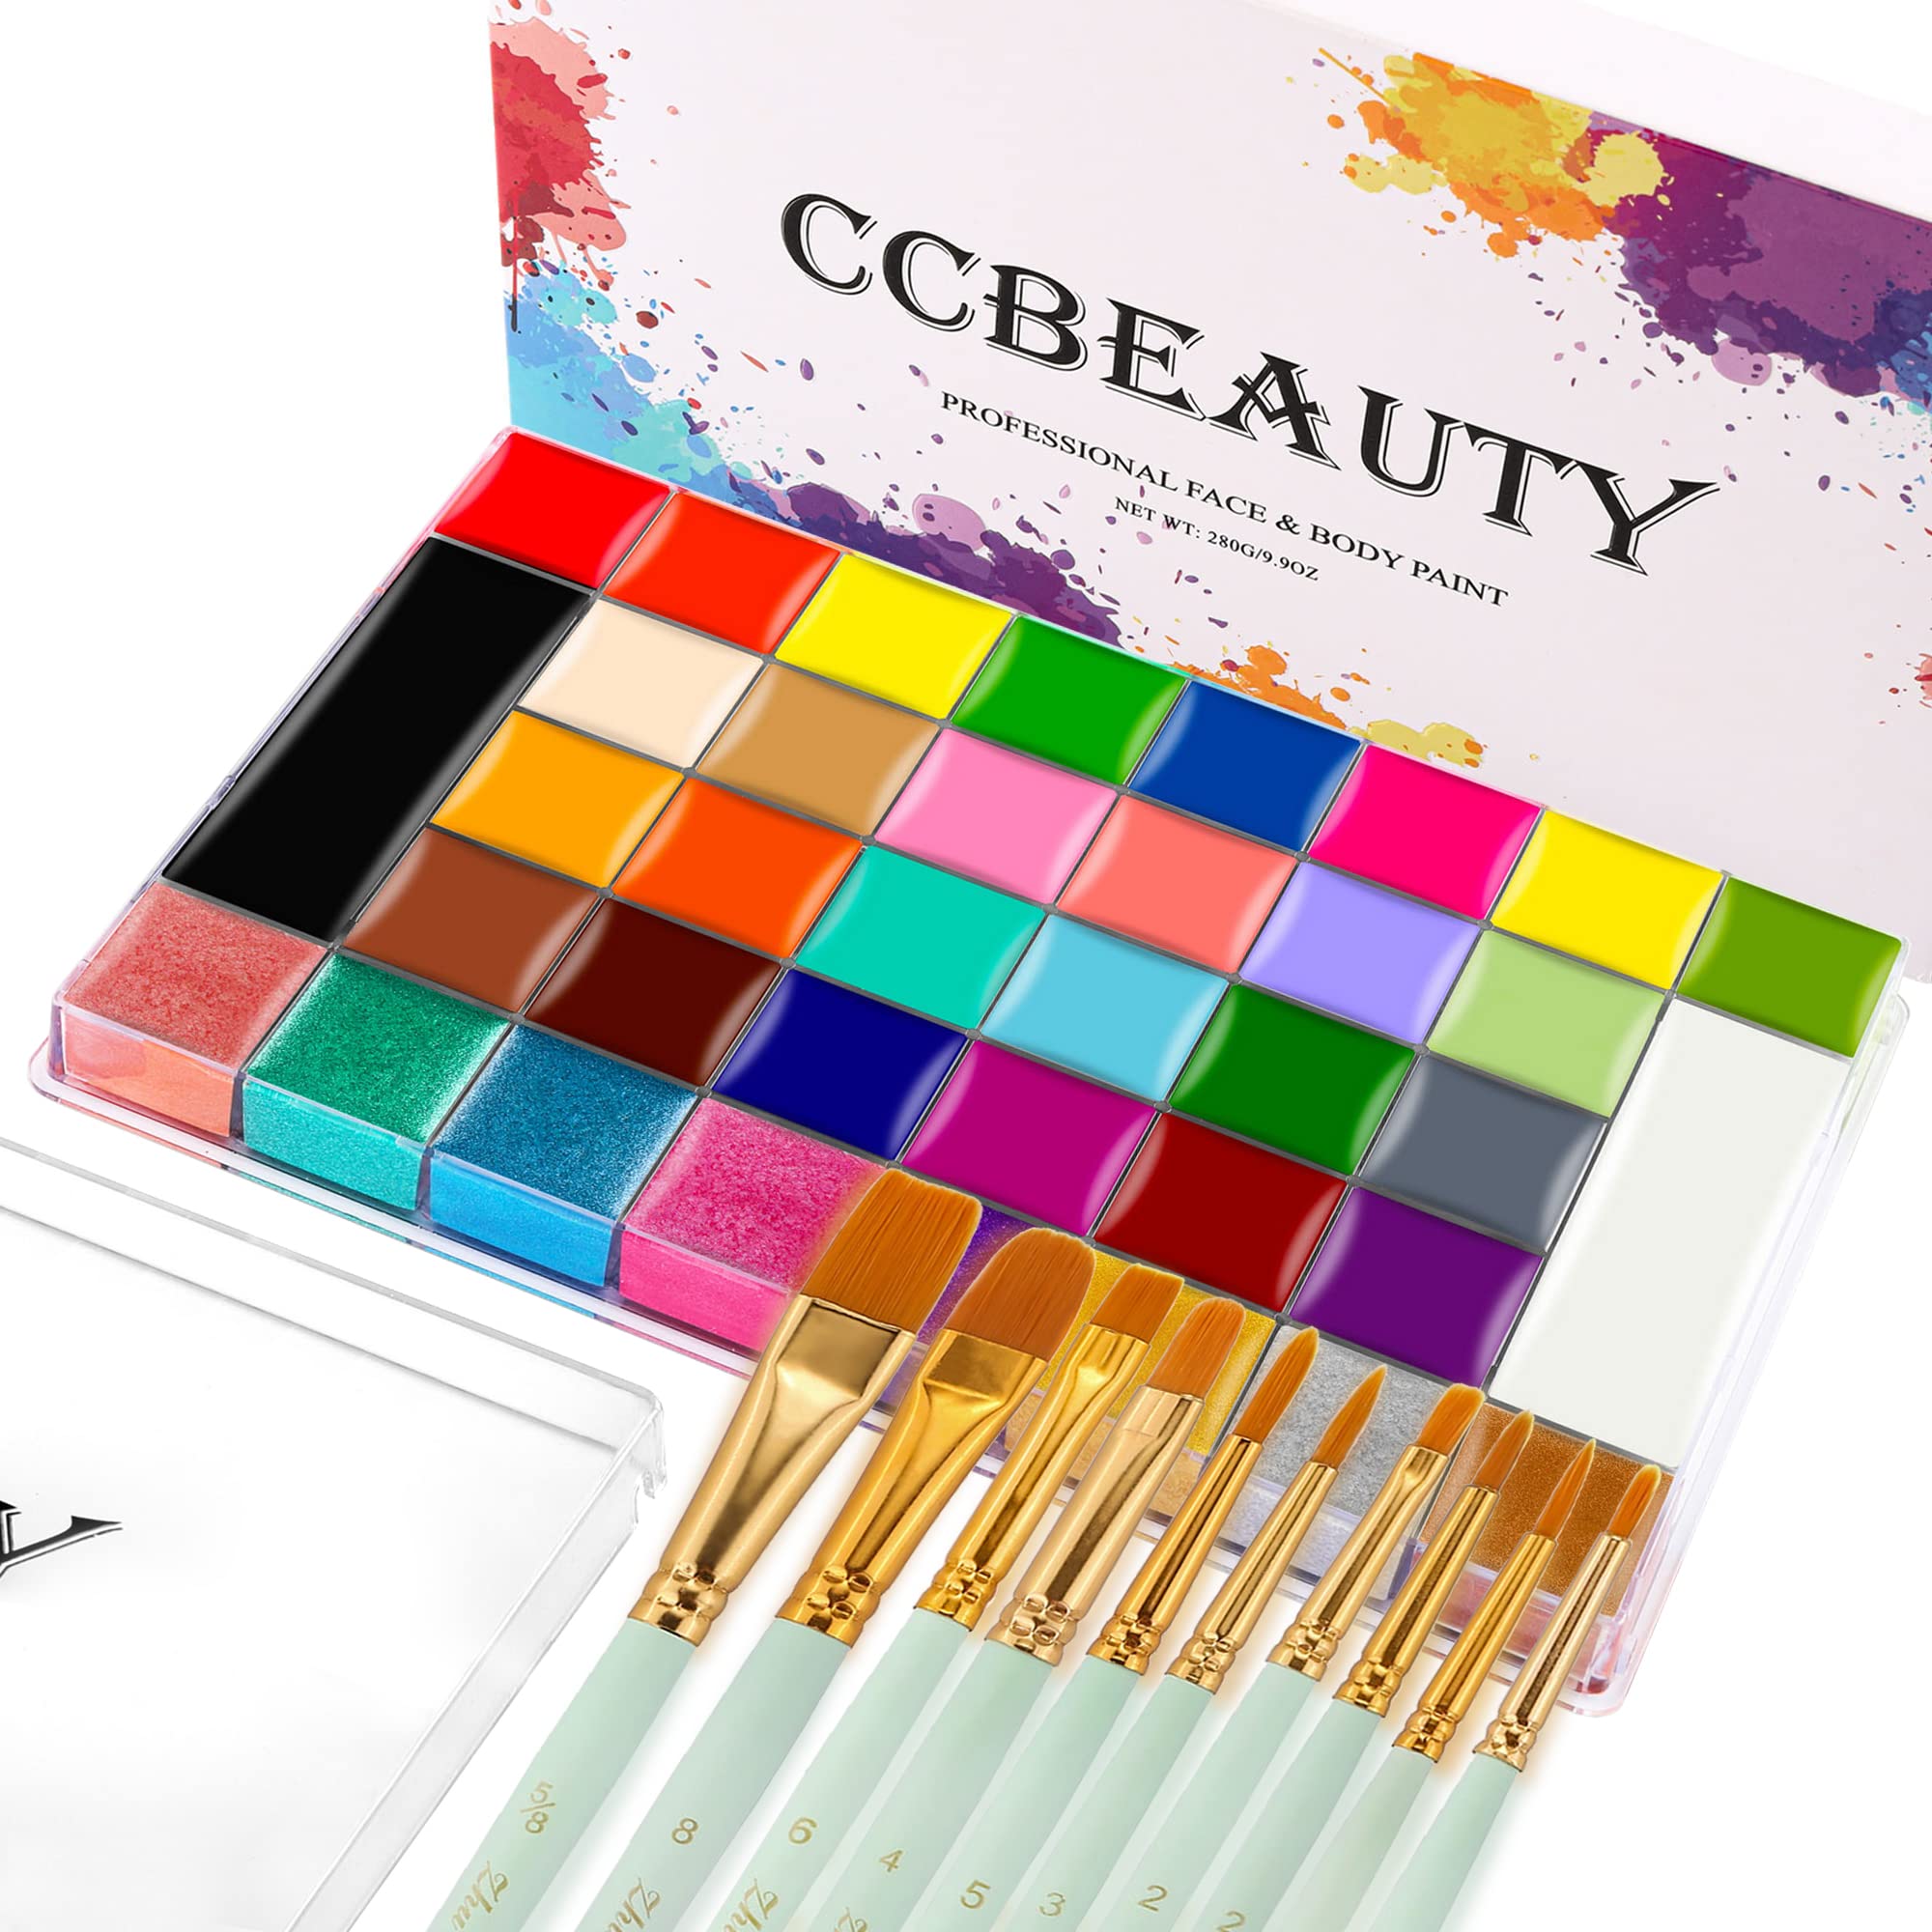 CCbeauty Professional Face Body Paint Oil 12 Colors Halloween Art Party Fancy Up